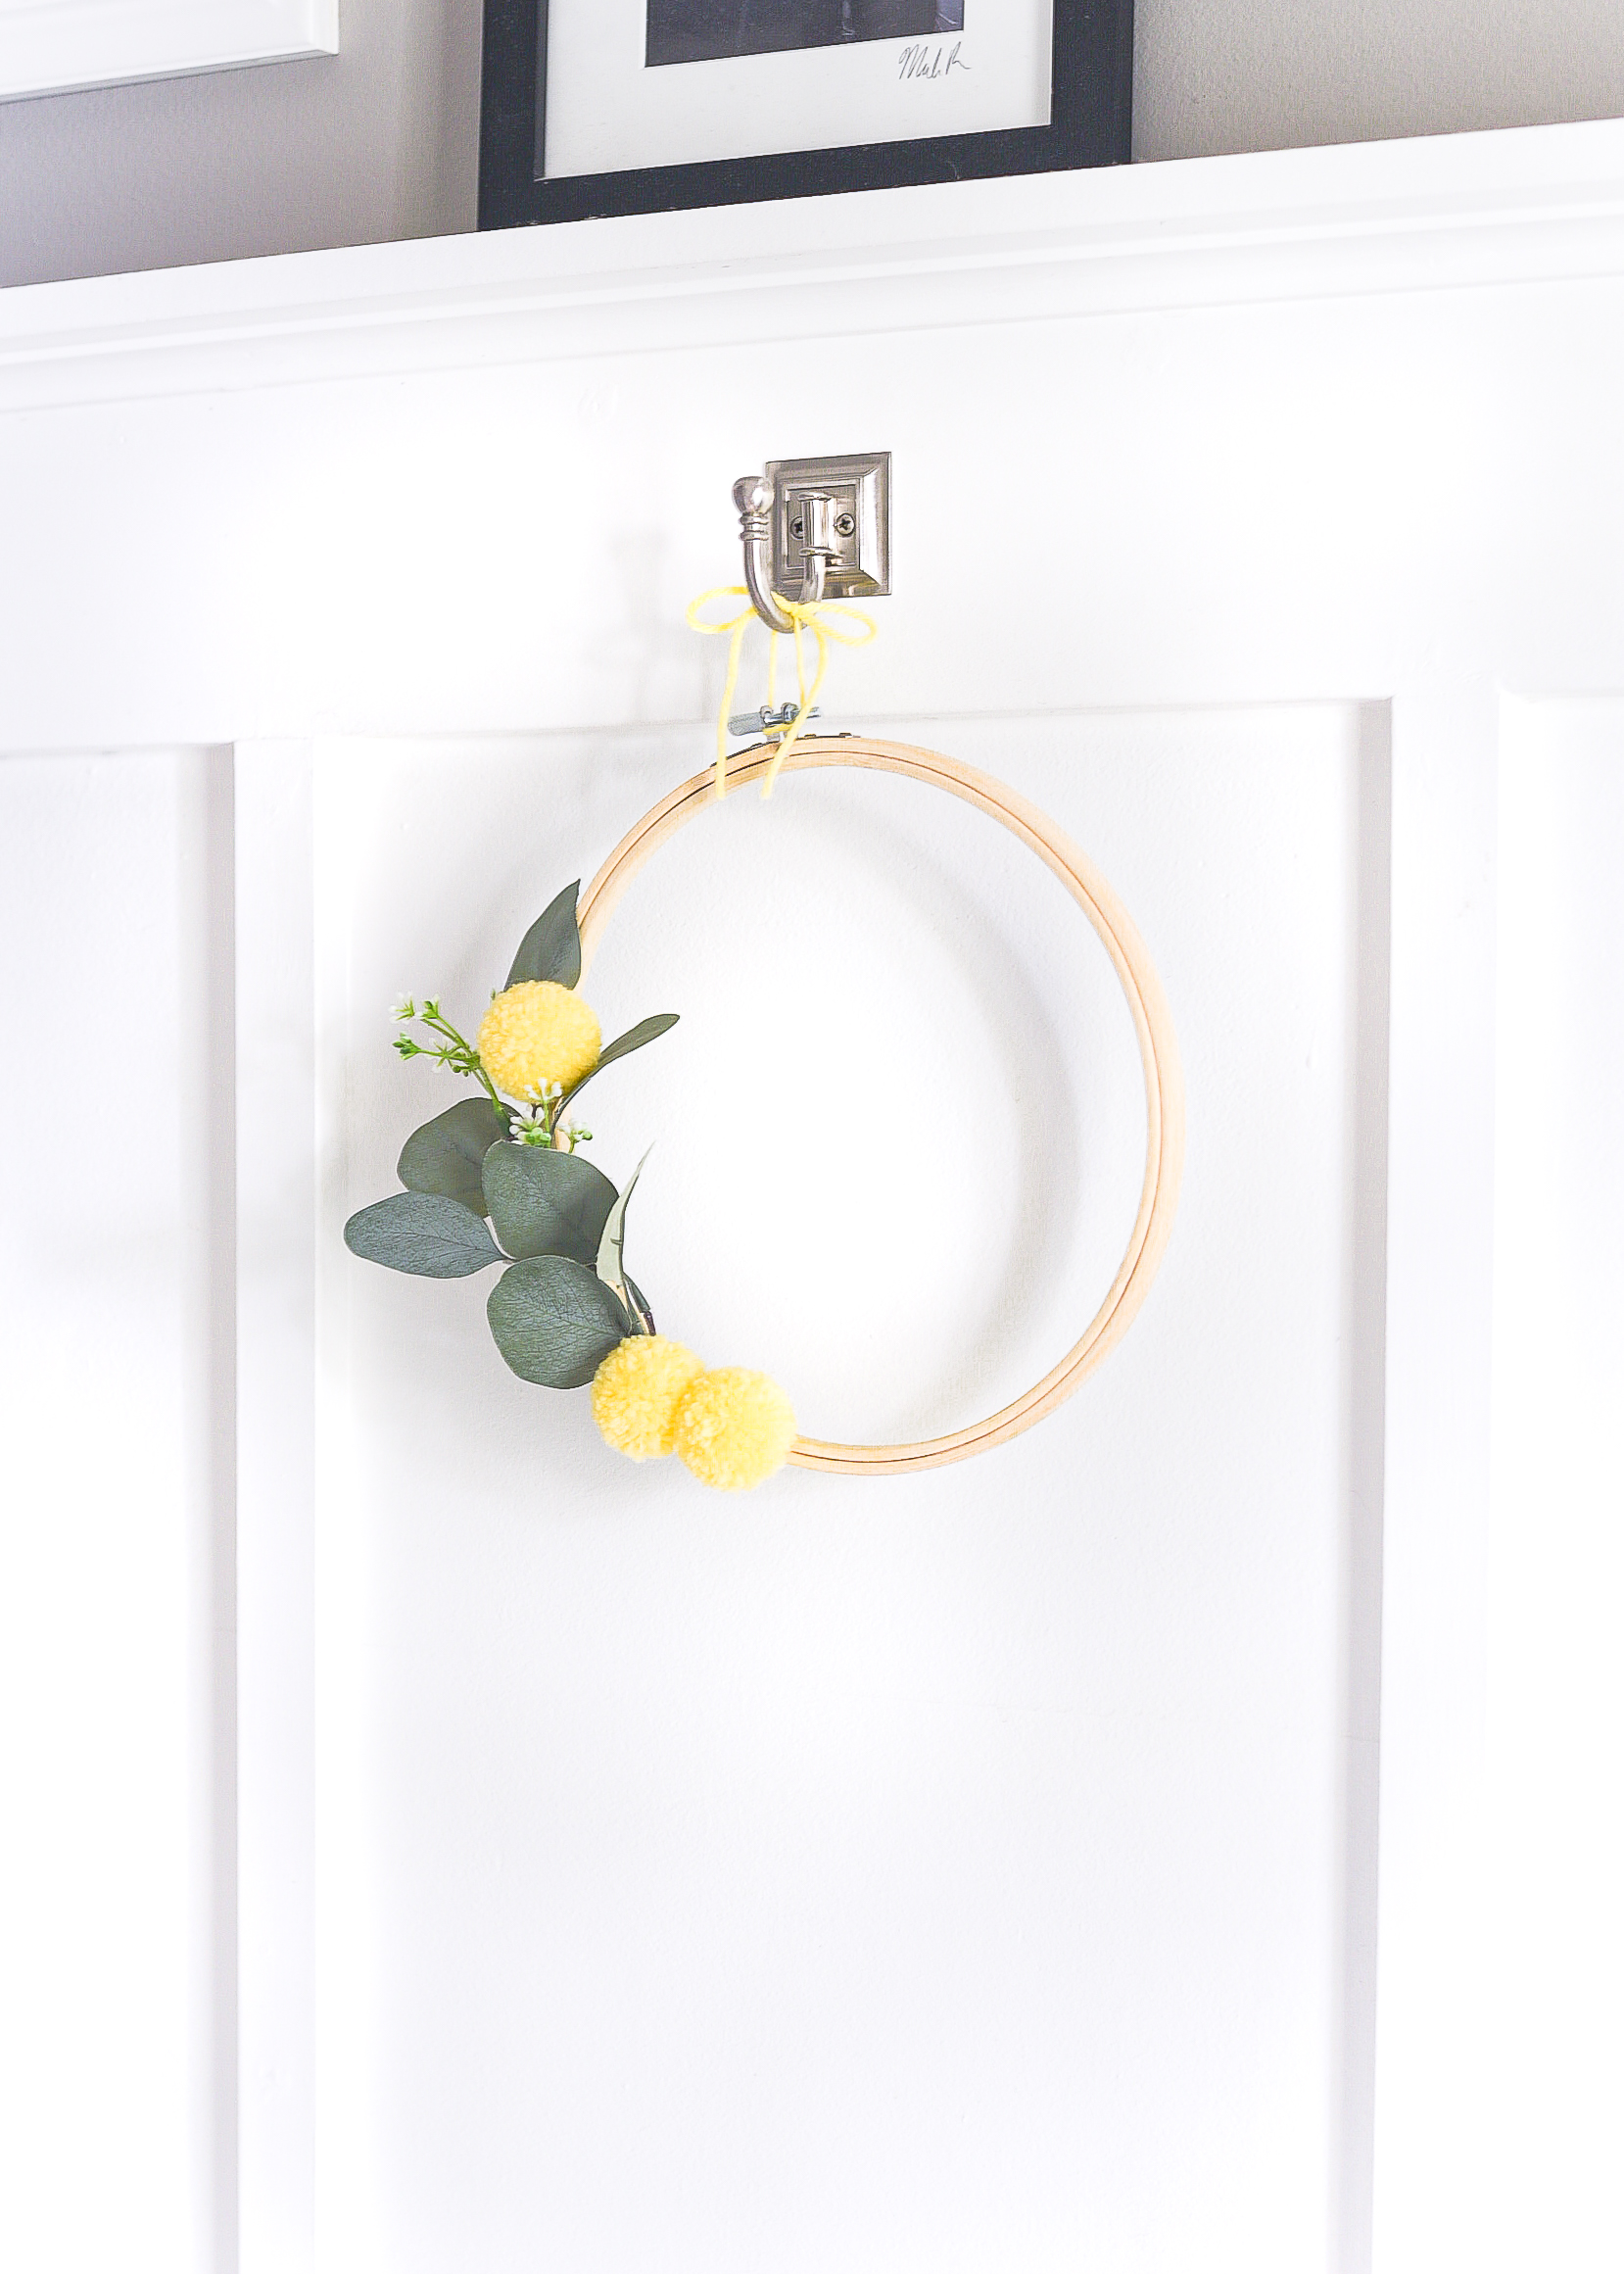 Embroidery Hoop Wreath with Faux Bill Ball Pom Poms - Yellow Summer Wreath Idea. Summer Embroidery Hoop Wreath with Faux Bill Ball Pom Poms.